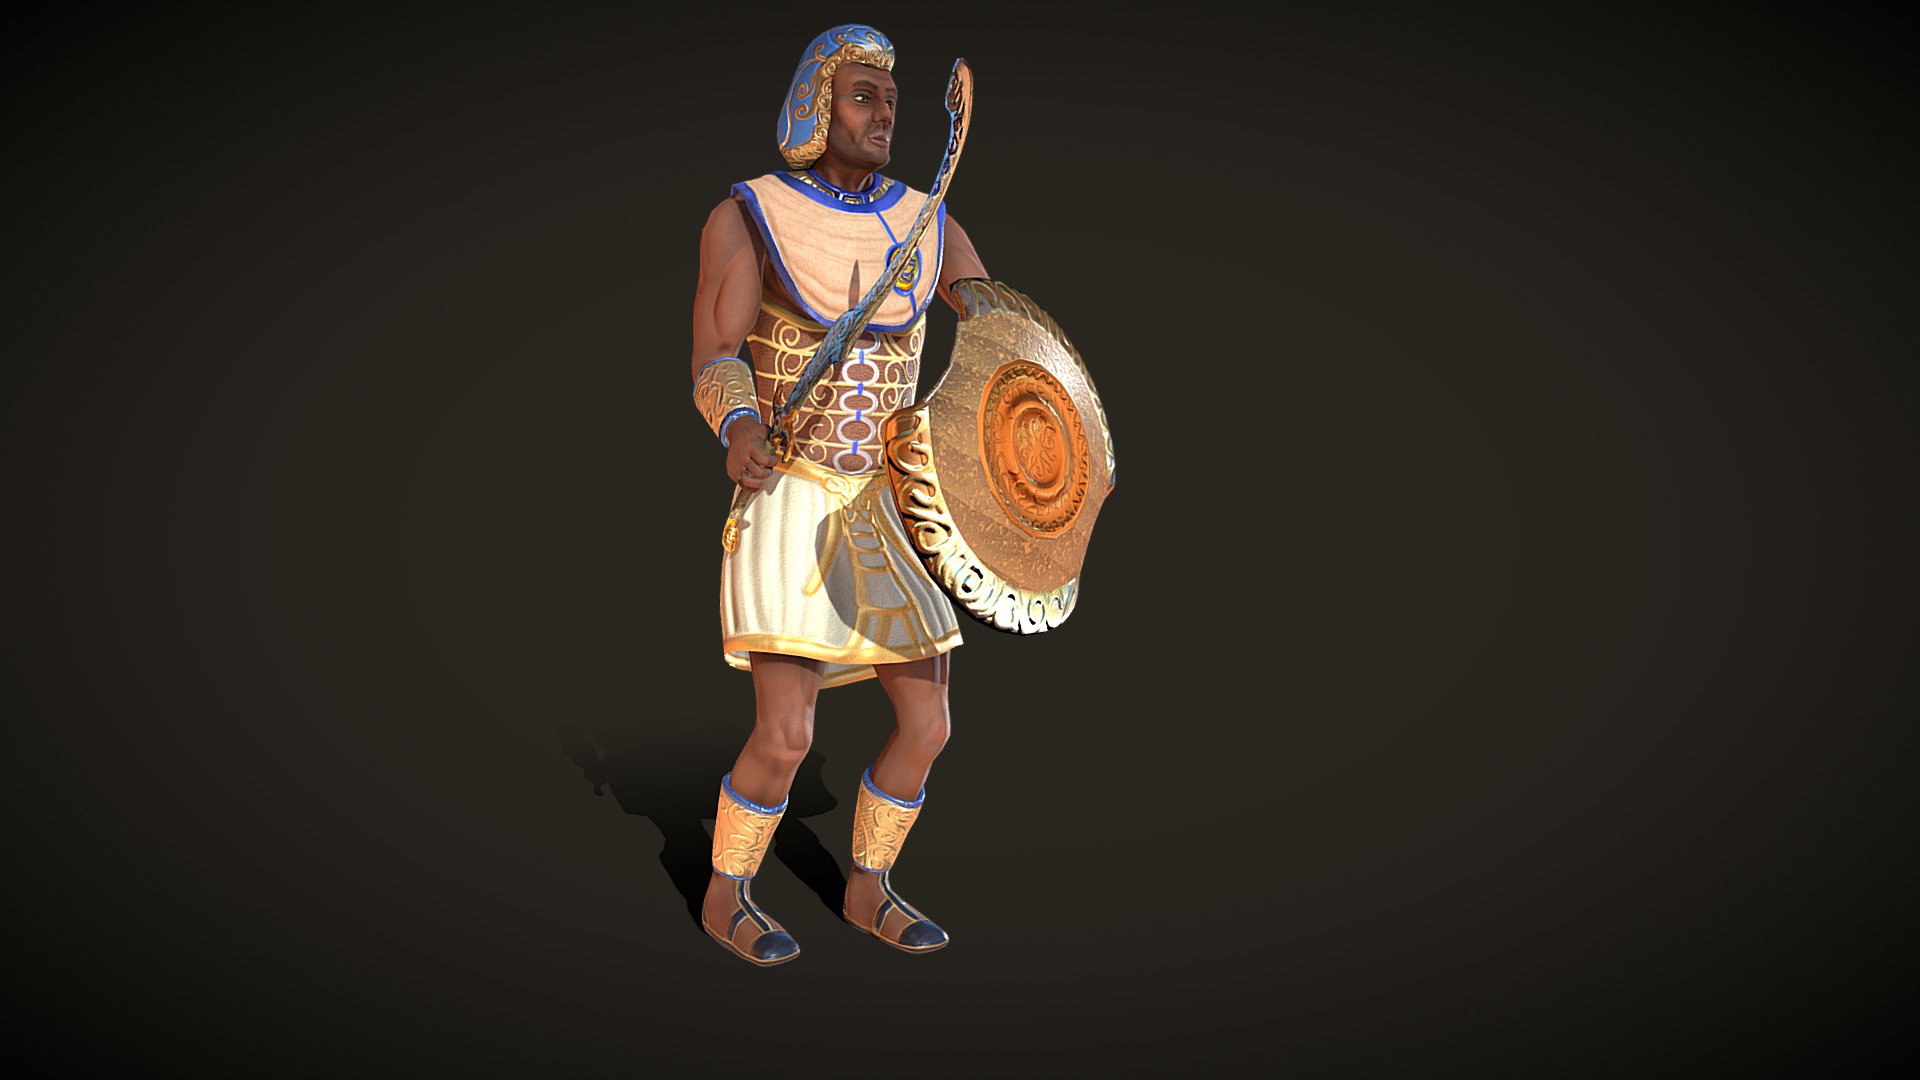 A character of excellent visual quality and low polygon count representing an ancient Egyptian warrior. Ideal for interactive or non-interactive virtual representations, simulations or games.




Has a collection of free animations. (Use it or retarget to other models)

Compatible with Unity, Unreal, Godot and other game engines.

Facial expressions can be created using &ldquo;bones